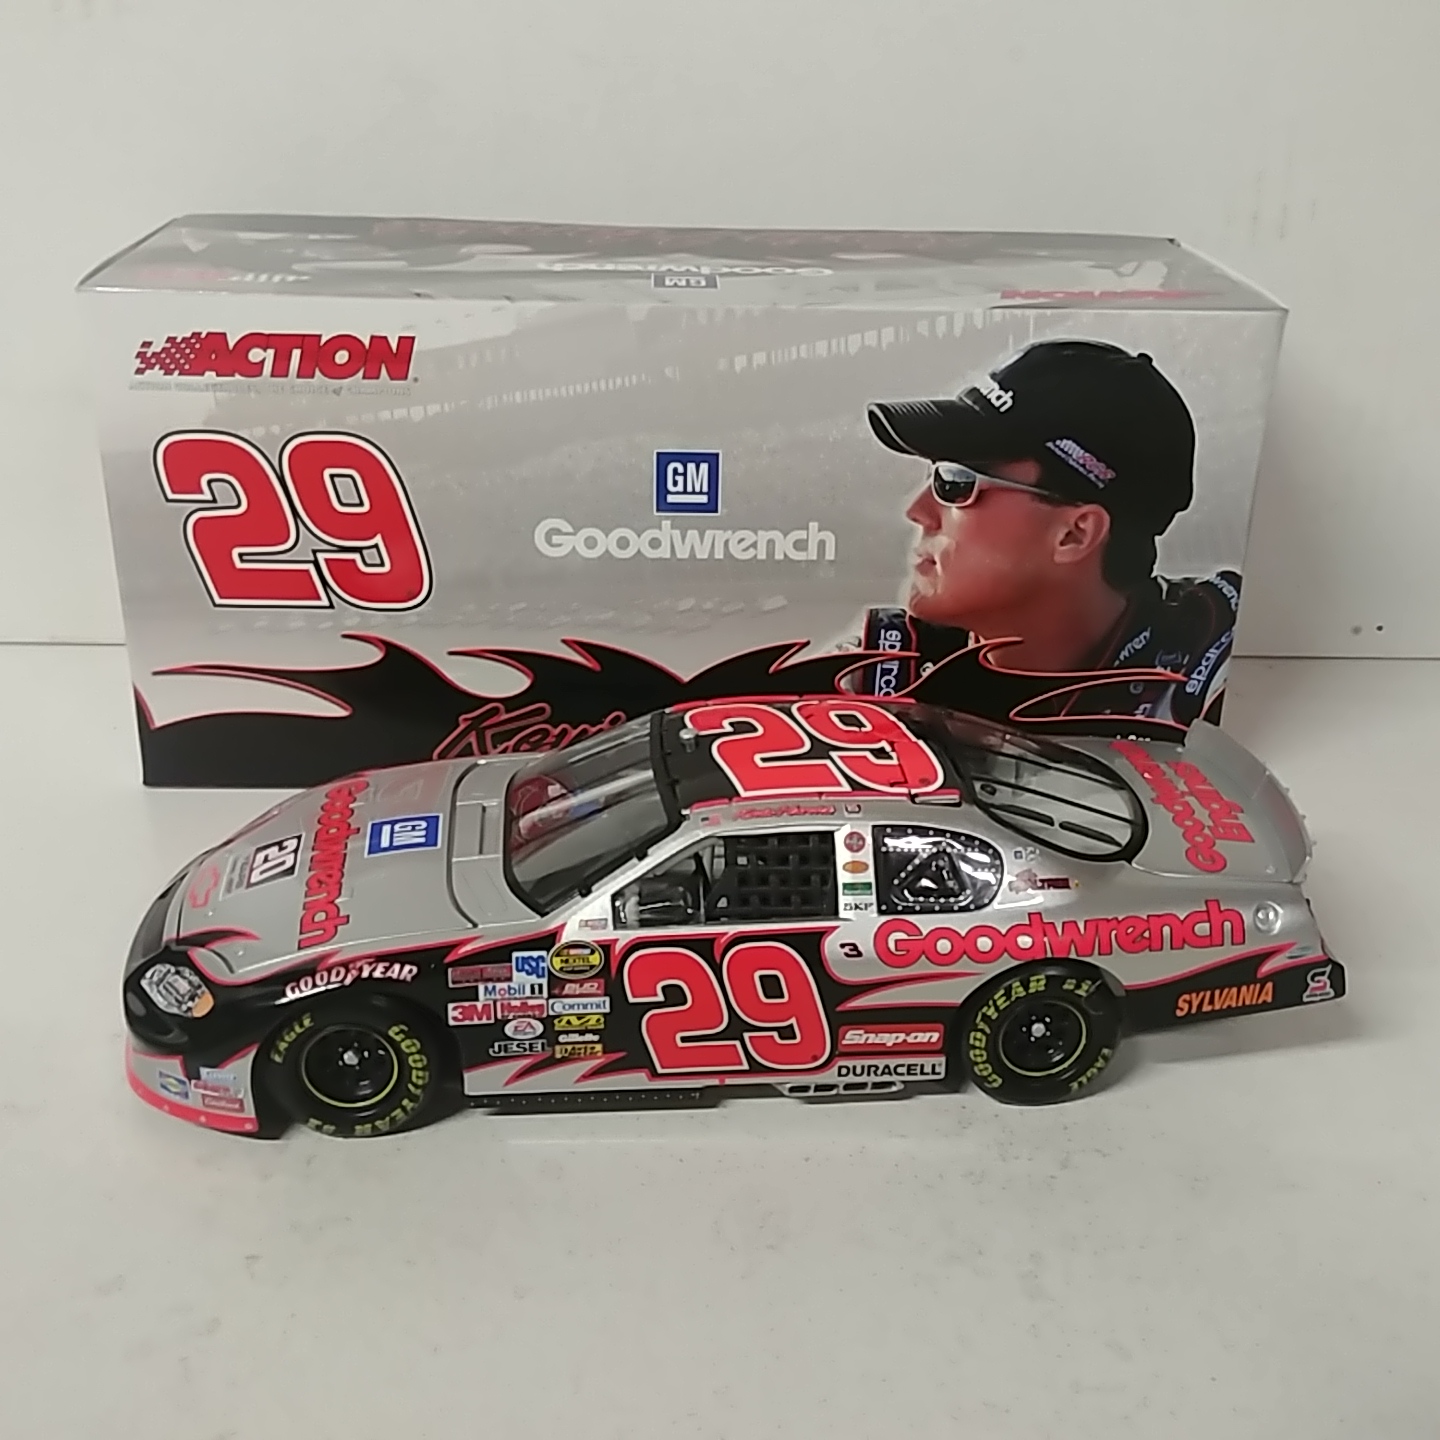 2005 Kevin Harvick 1/24th GMGW "Quick Silver"  All Star Race c/w car